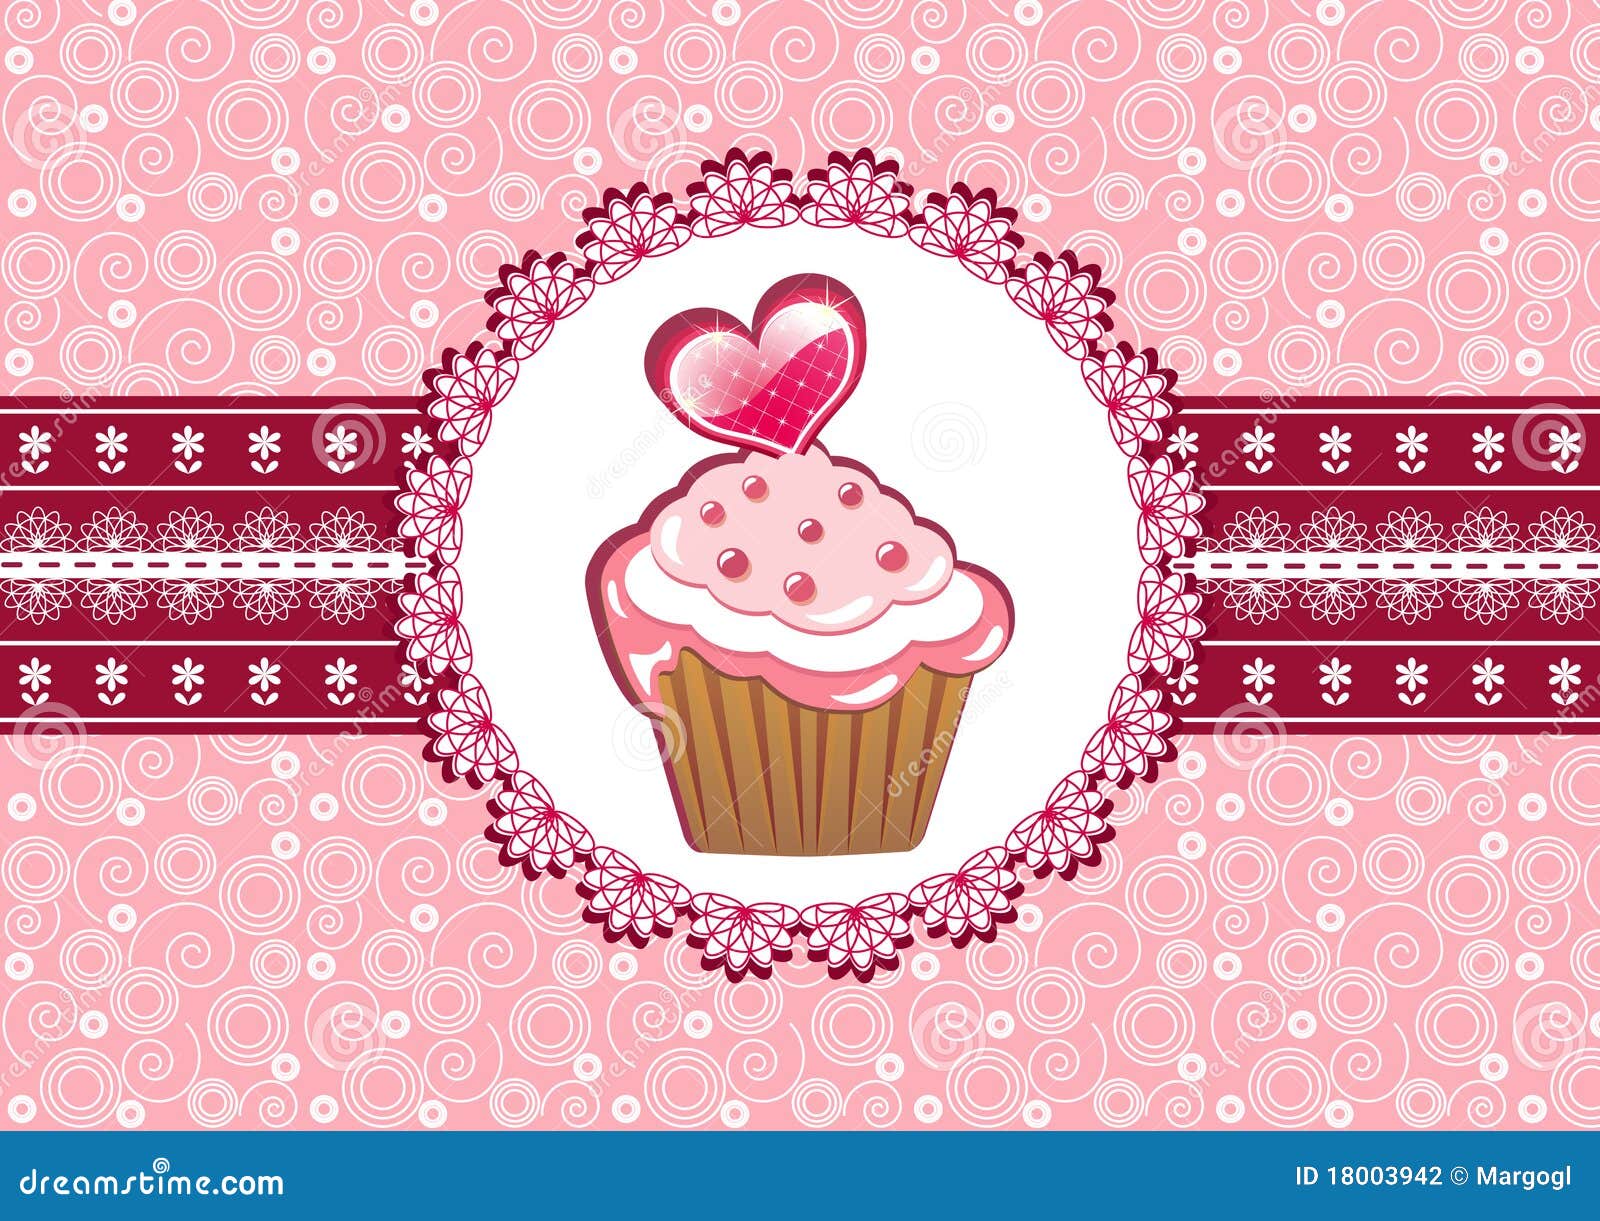 cupcake on the doily.